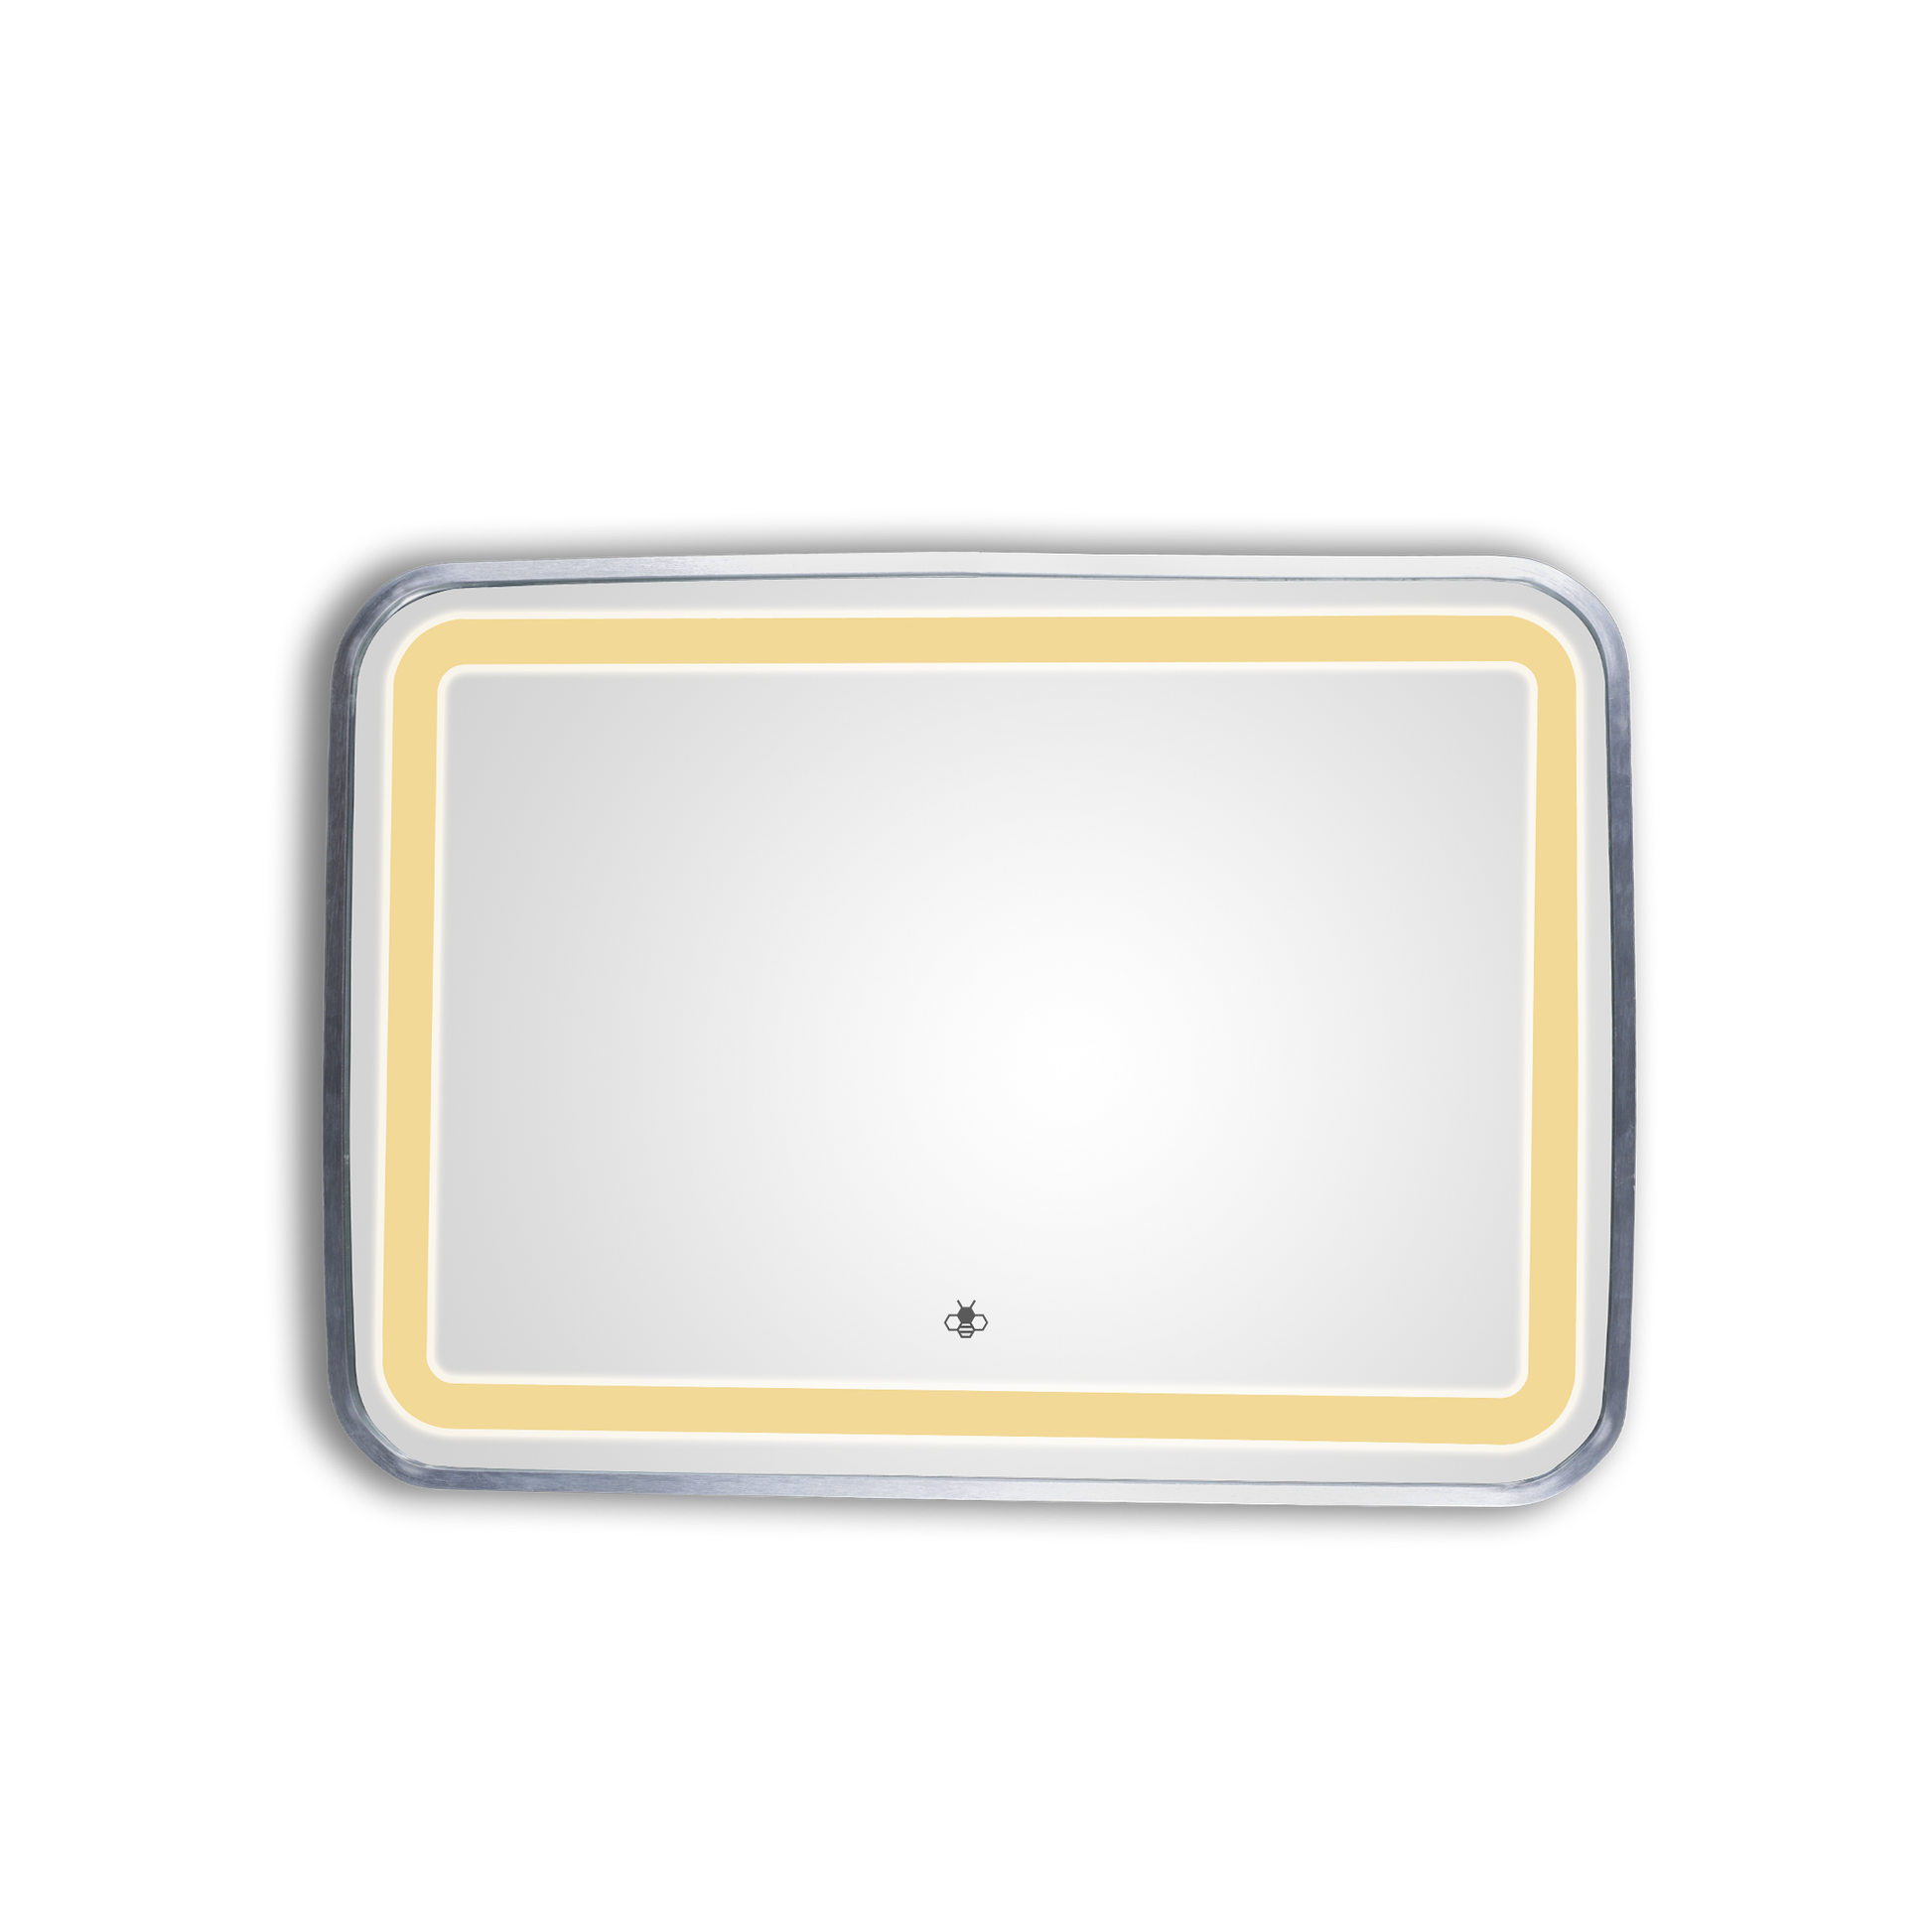 c4dbeeef-bc2e-4f13-8194-72e2f70bcea2/Rectangle_Horizontal_30_SILVER_front.png